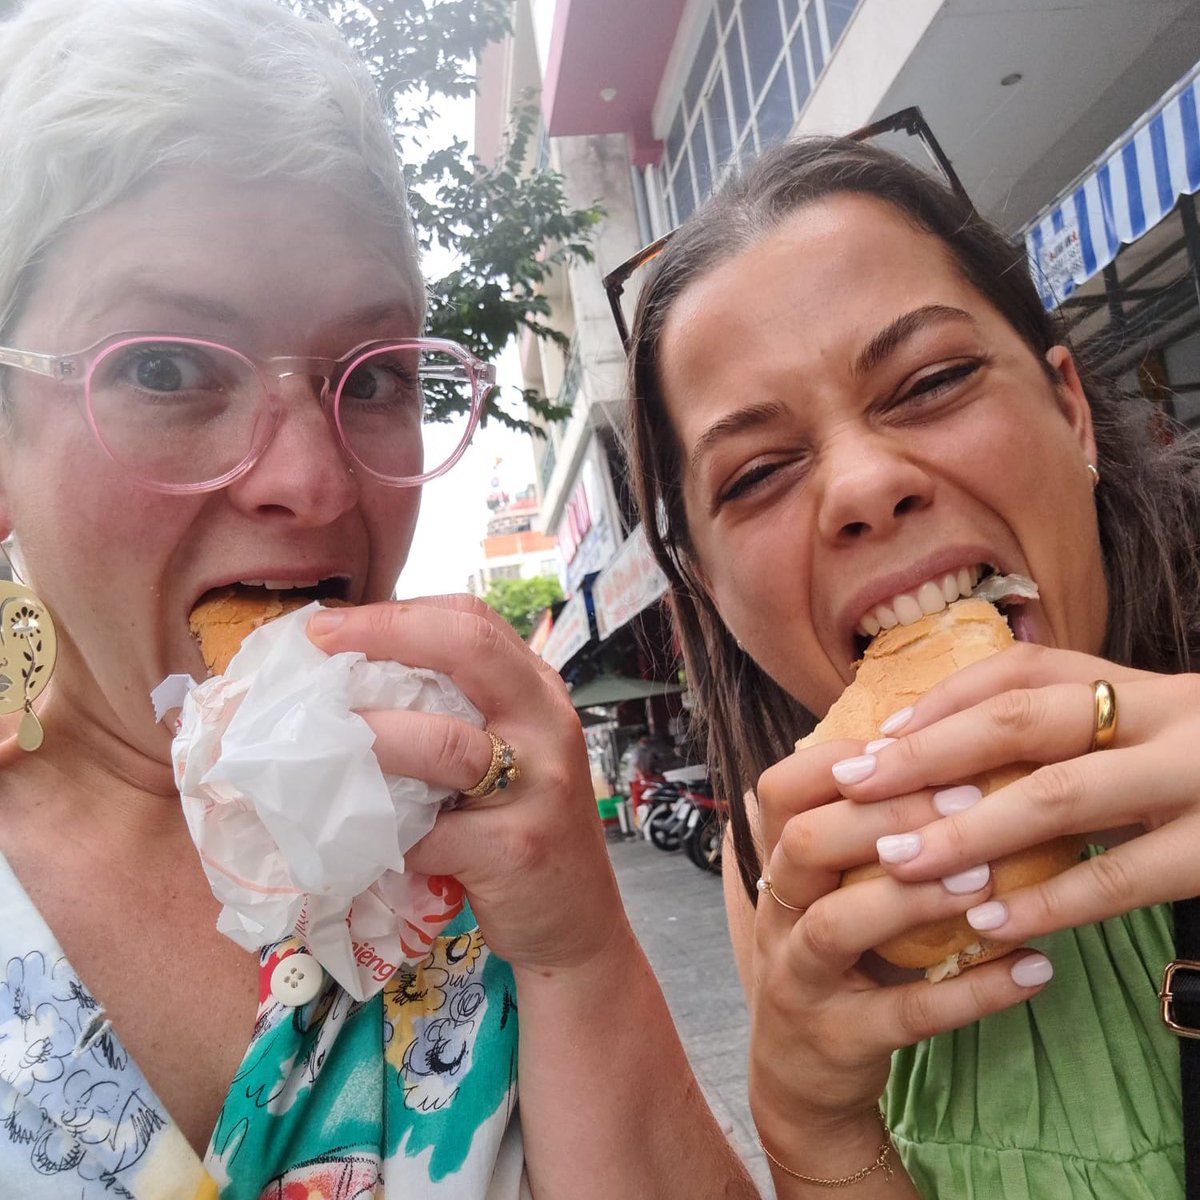 There’s no báhn mì better than the “truth báhn mì” - the Vaccine Champions Program in Viet Nam’s take on the truth sandwich. Actually, maybe just this one. @JessicaJKaufman @DanchinMargie